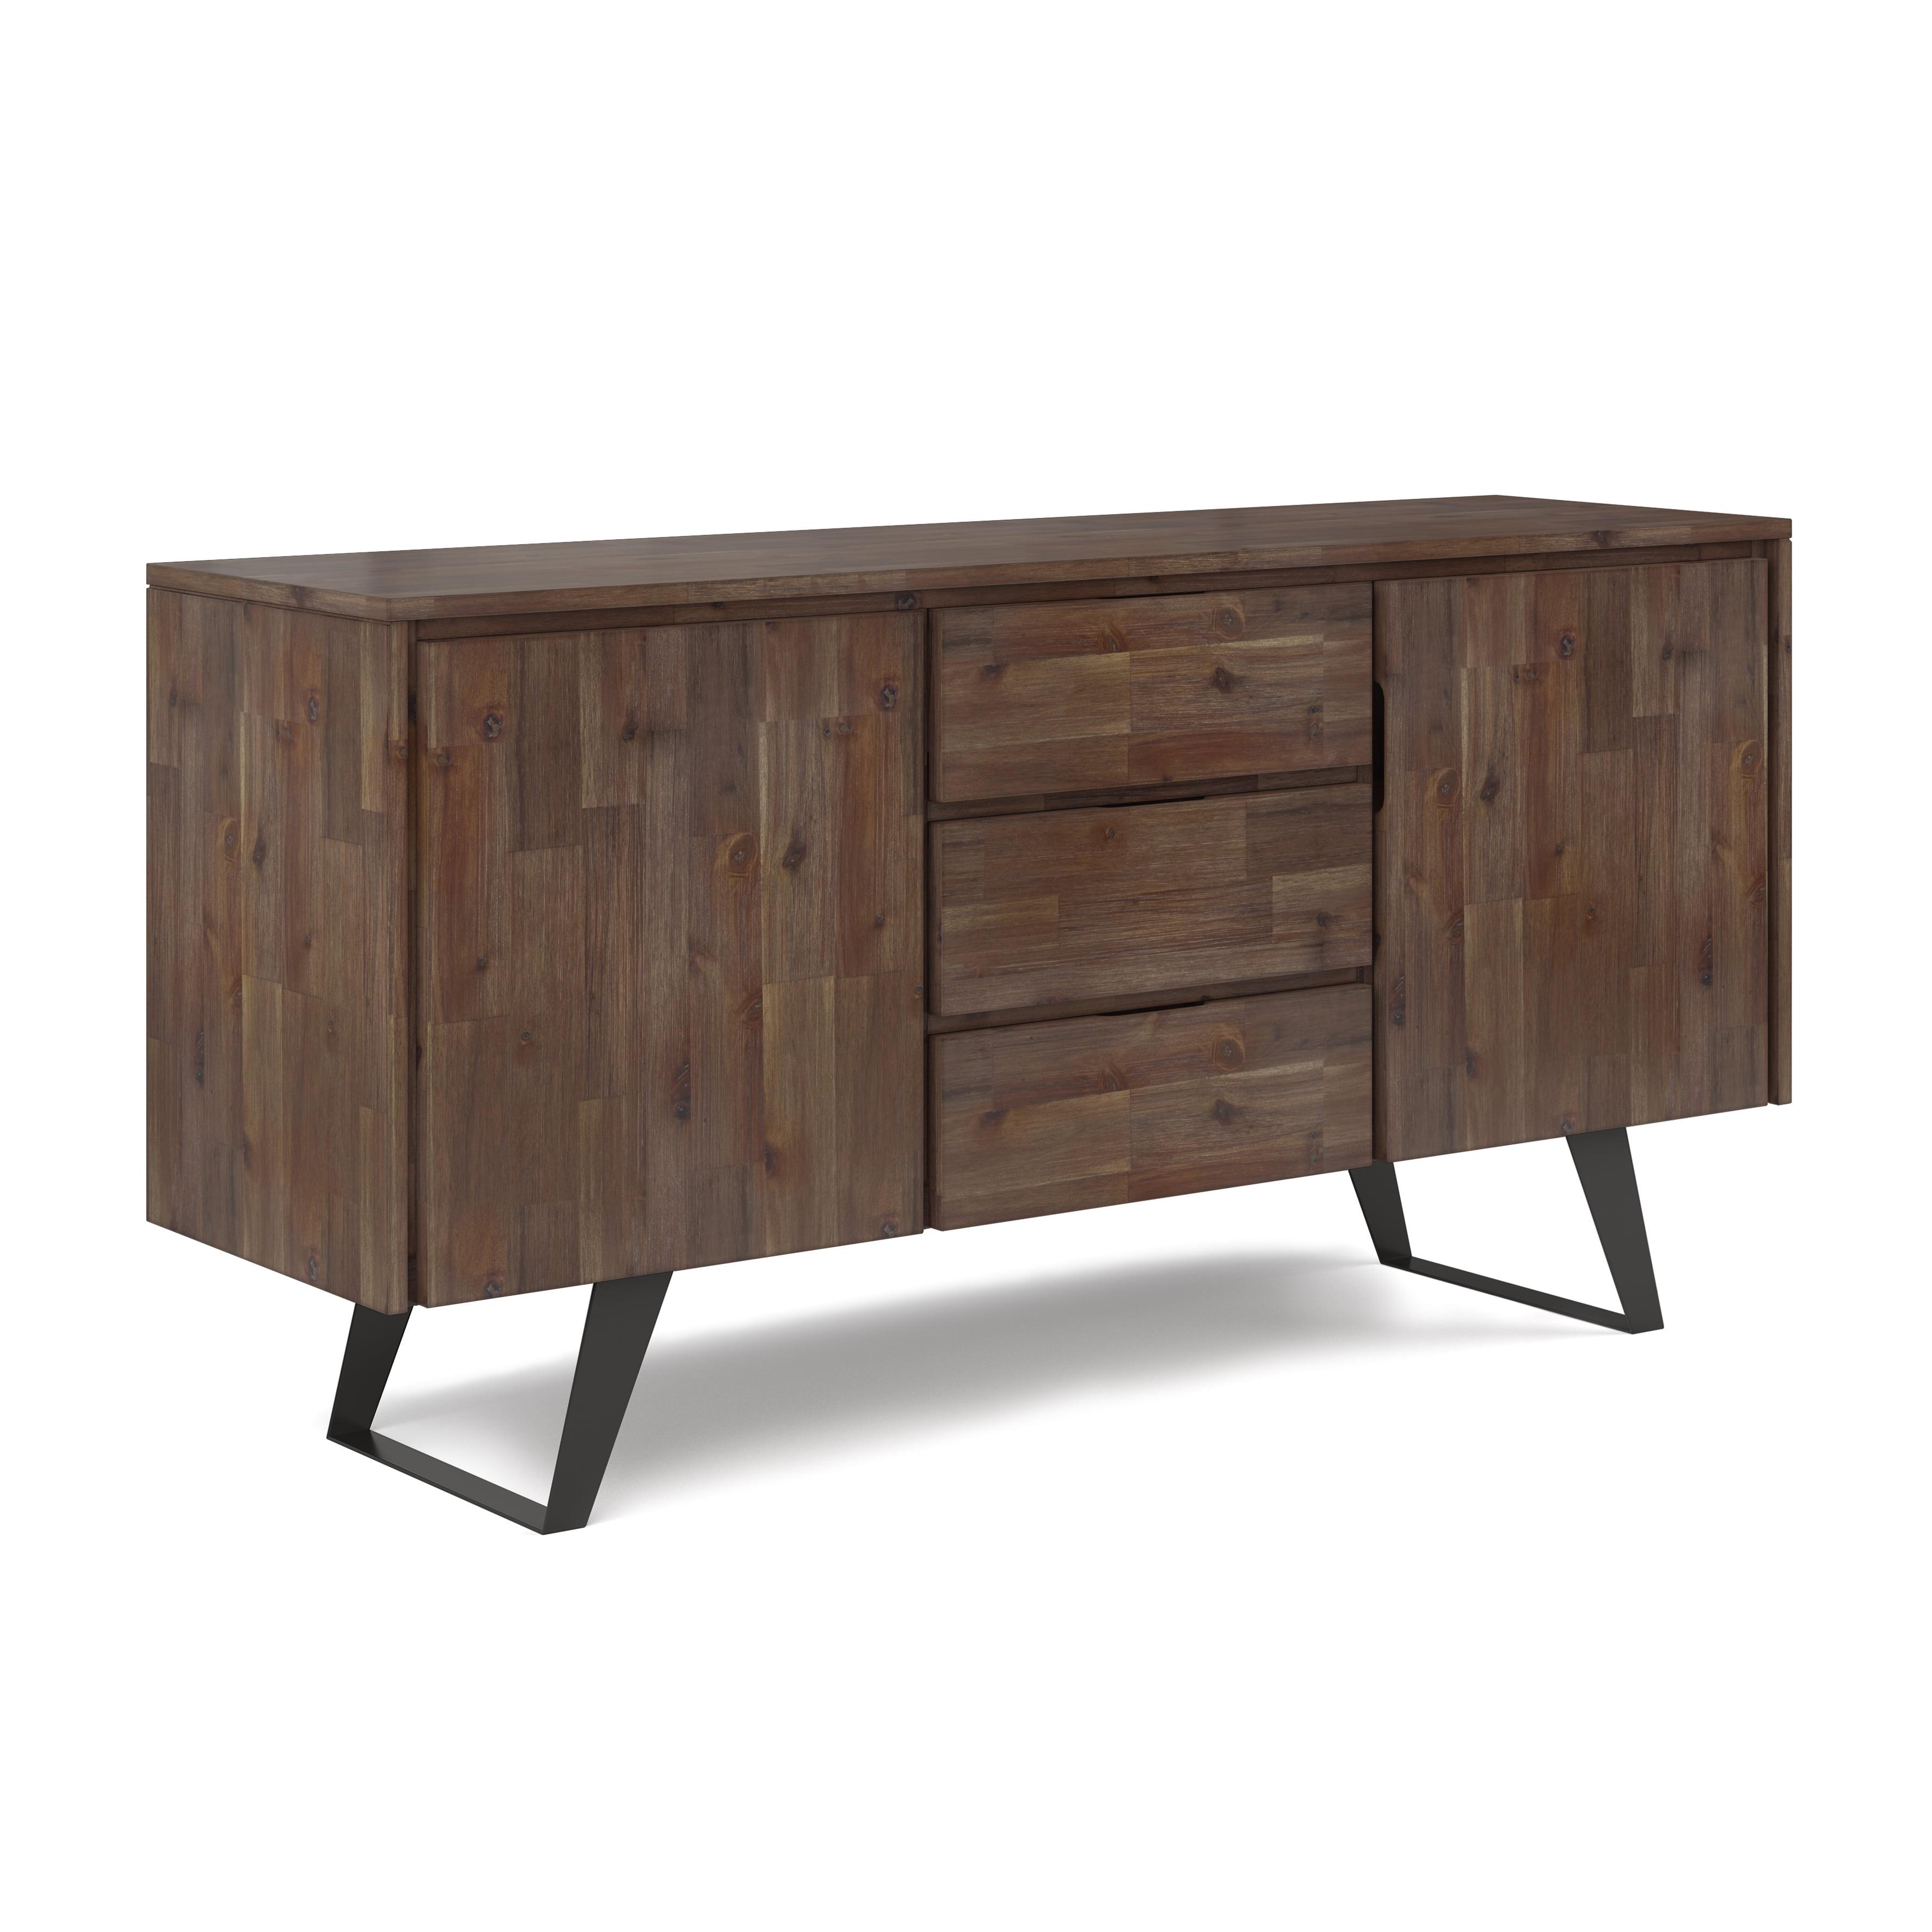 Lowry Solid Acacia Wood Sideboard Buffet in Rustic Natural Aged Brown